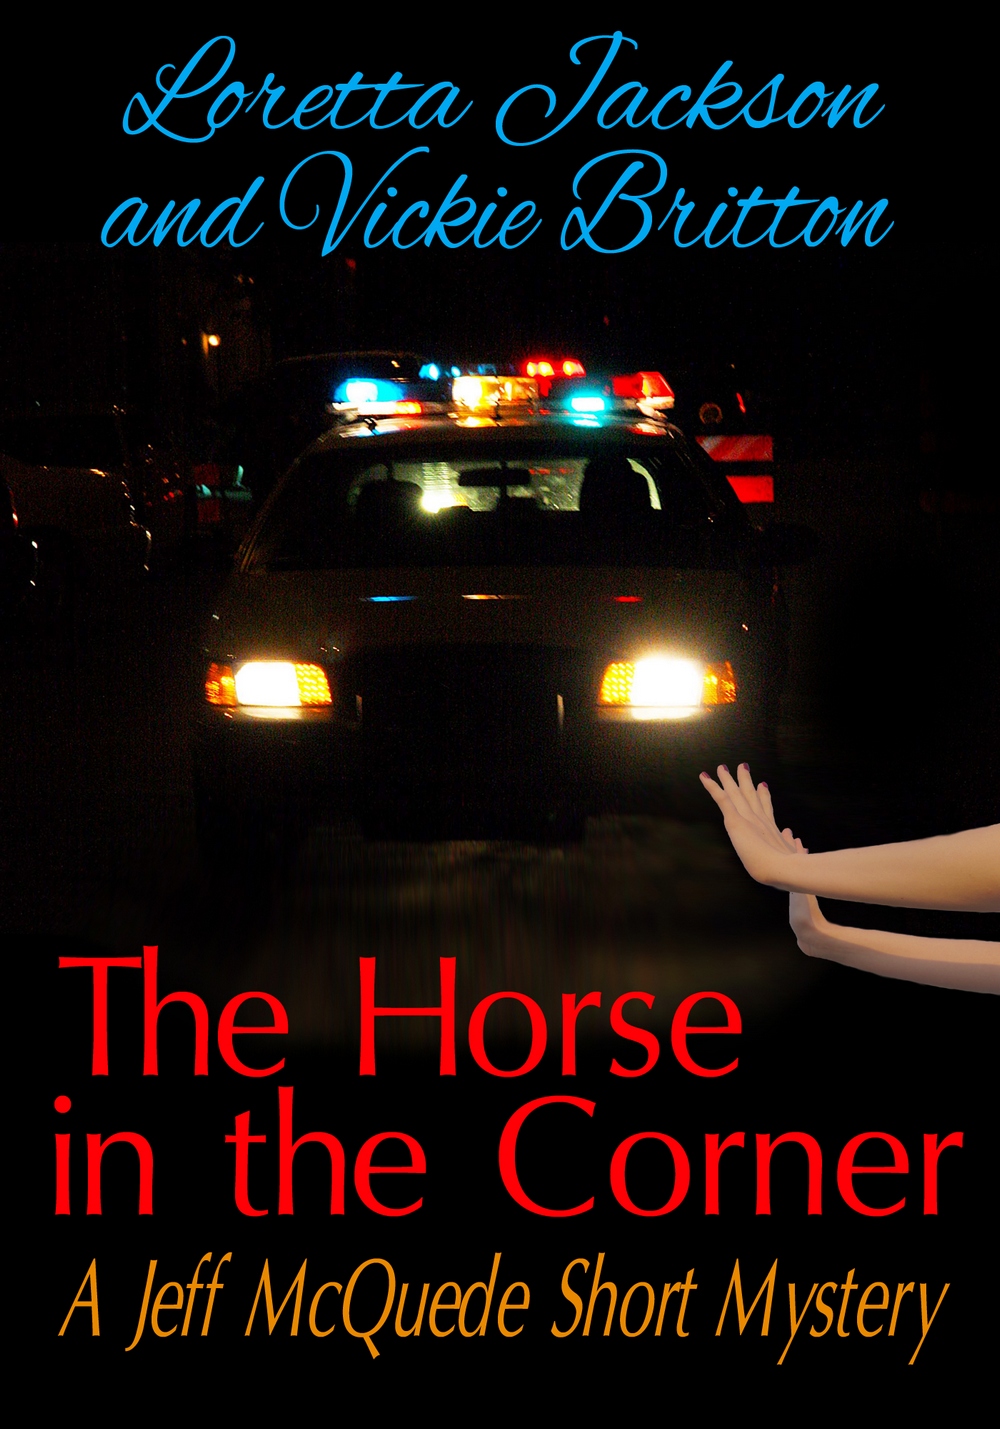 A JEFF MCQUEDE SHORT STORY: THE HORSE IN THE CORNER